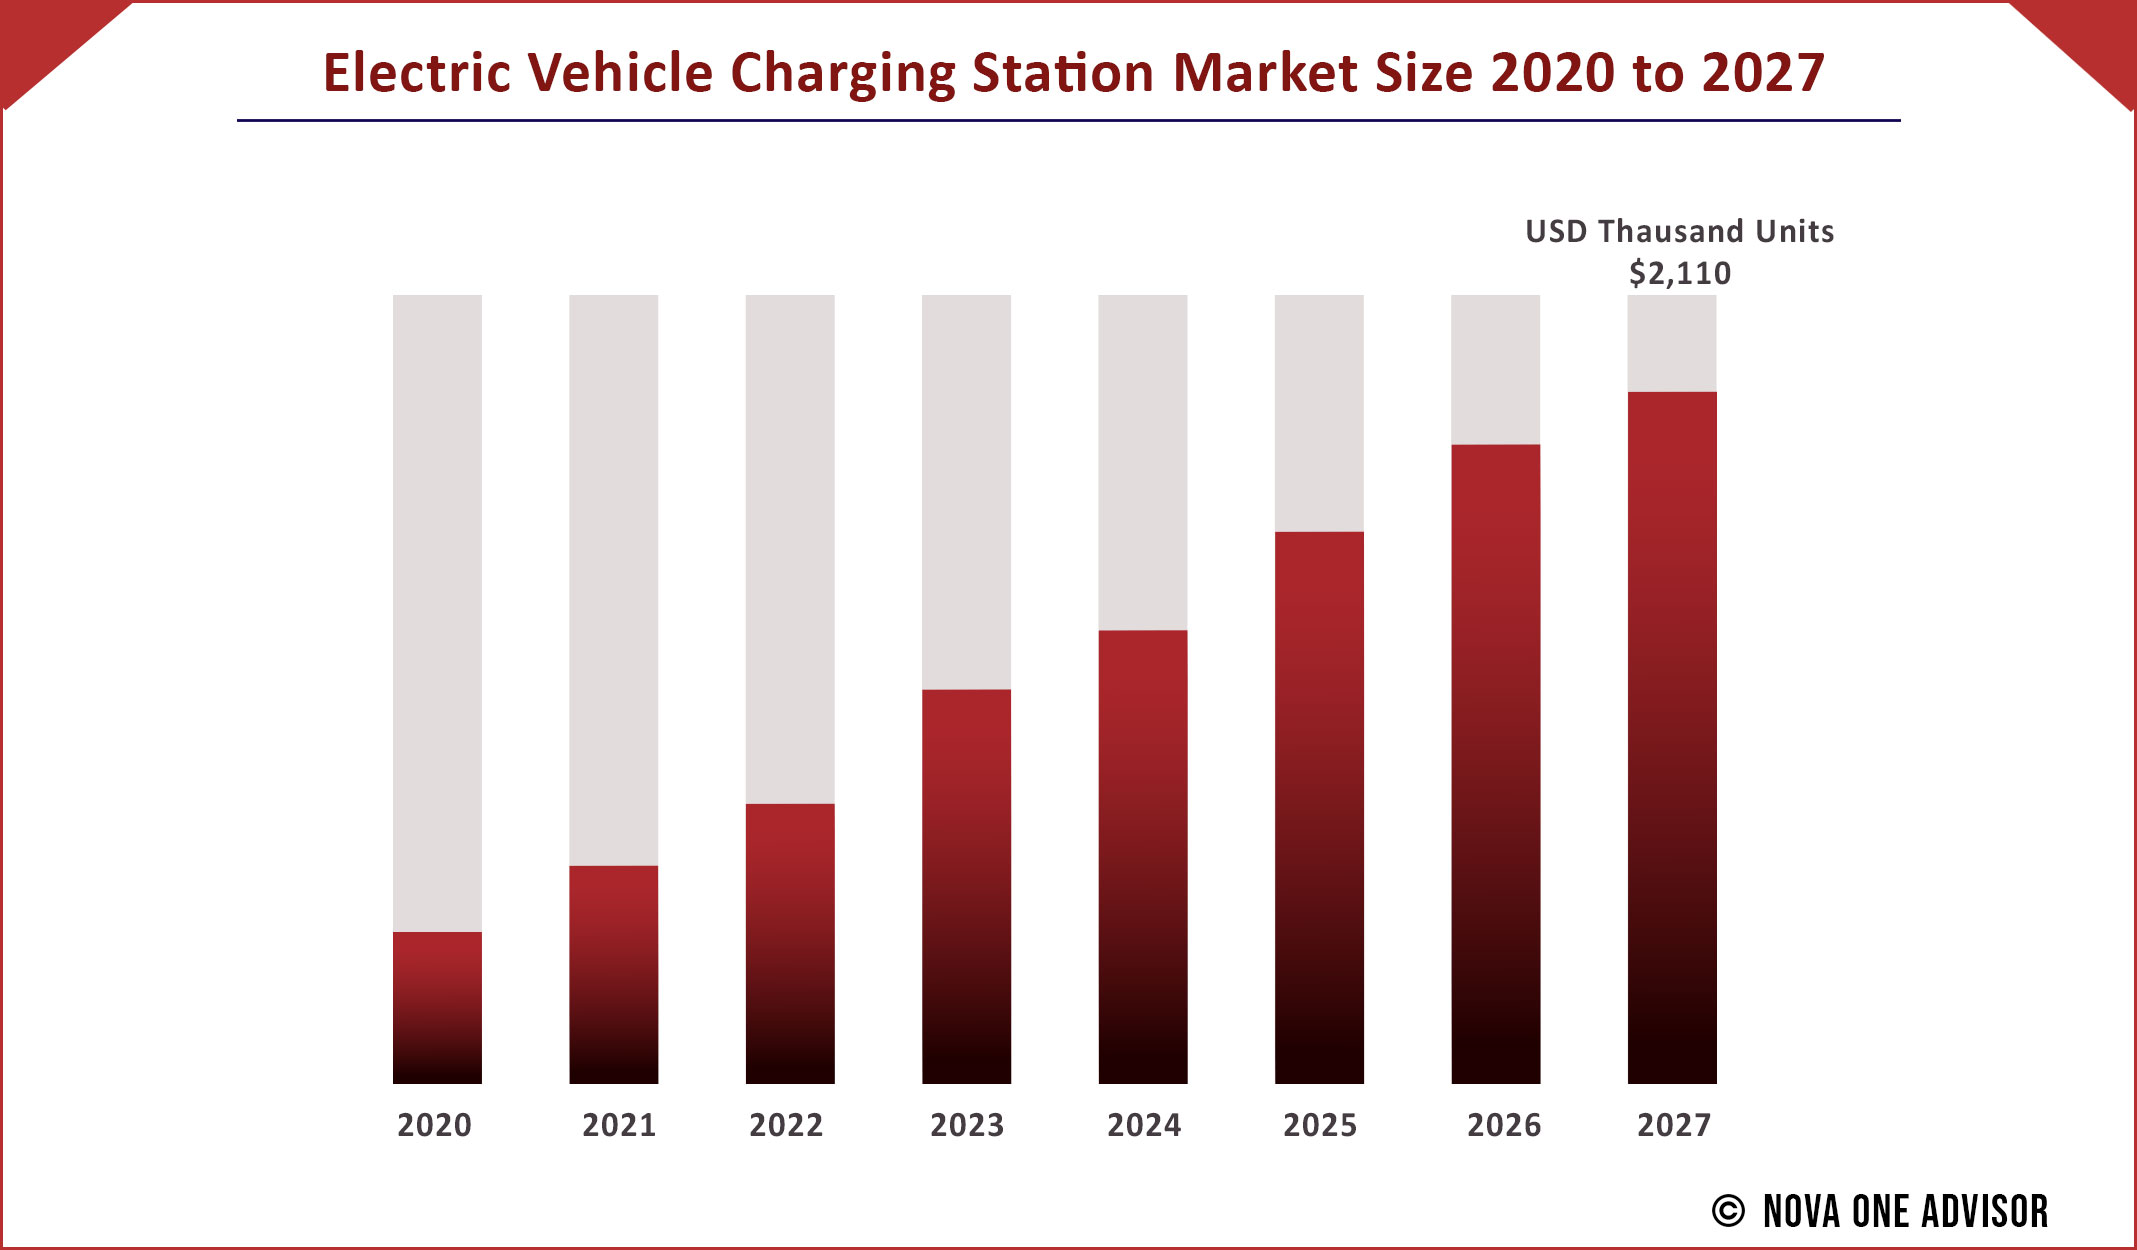 Electric Vehicle Charging Station Market Size 2020 to 2027